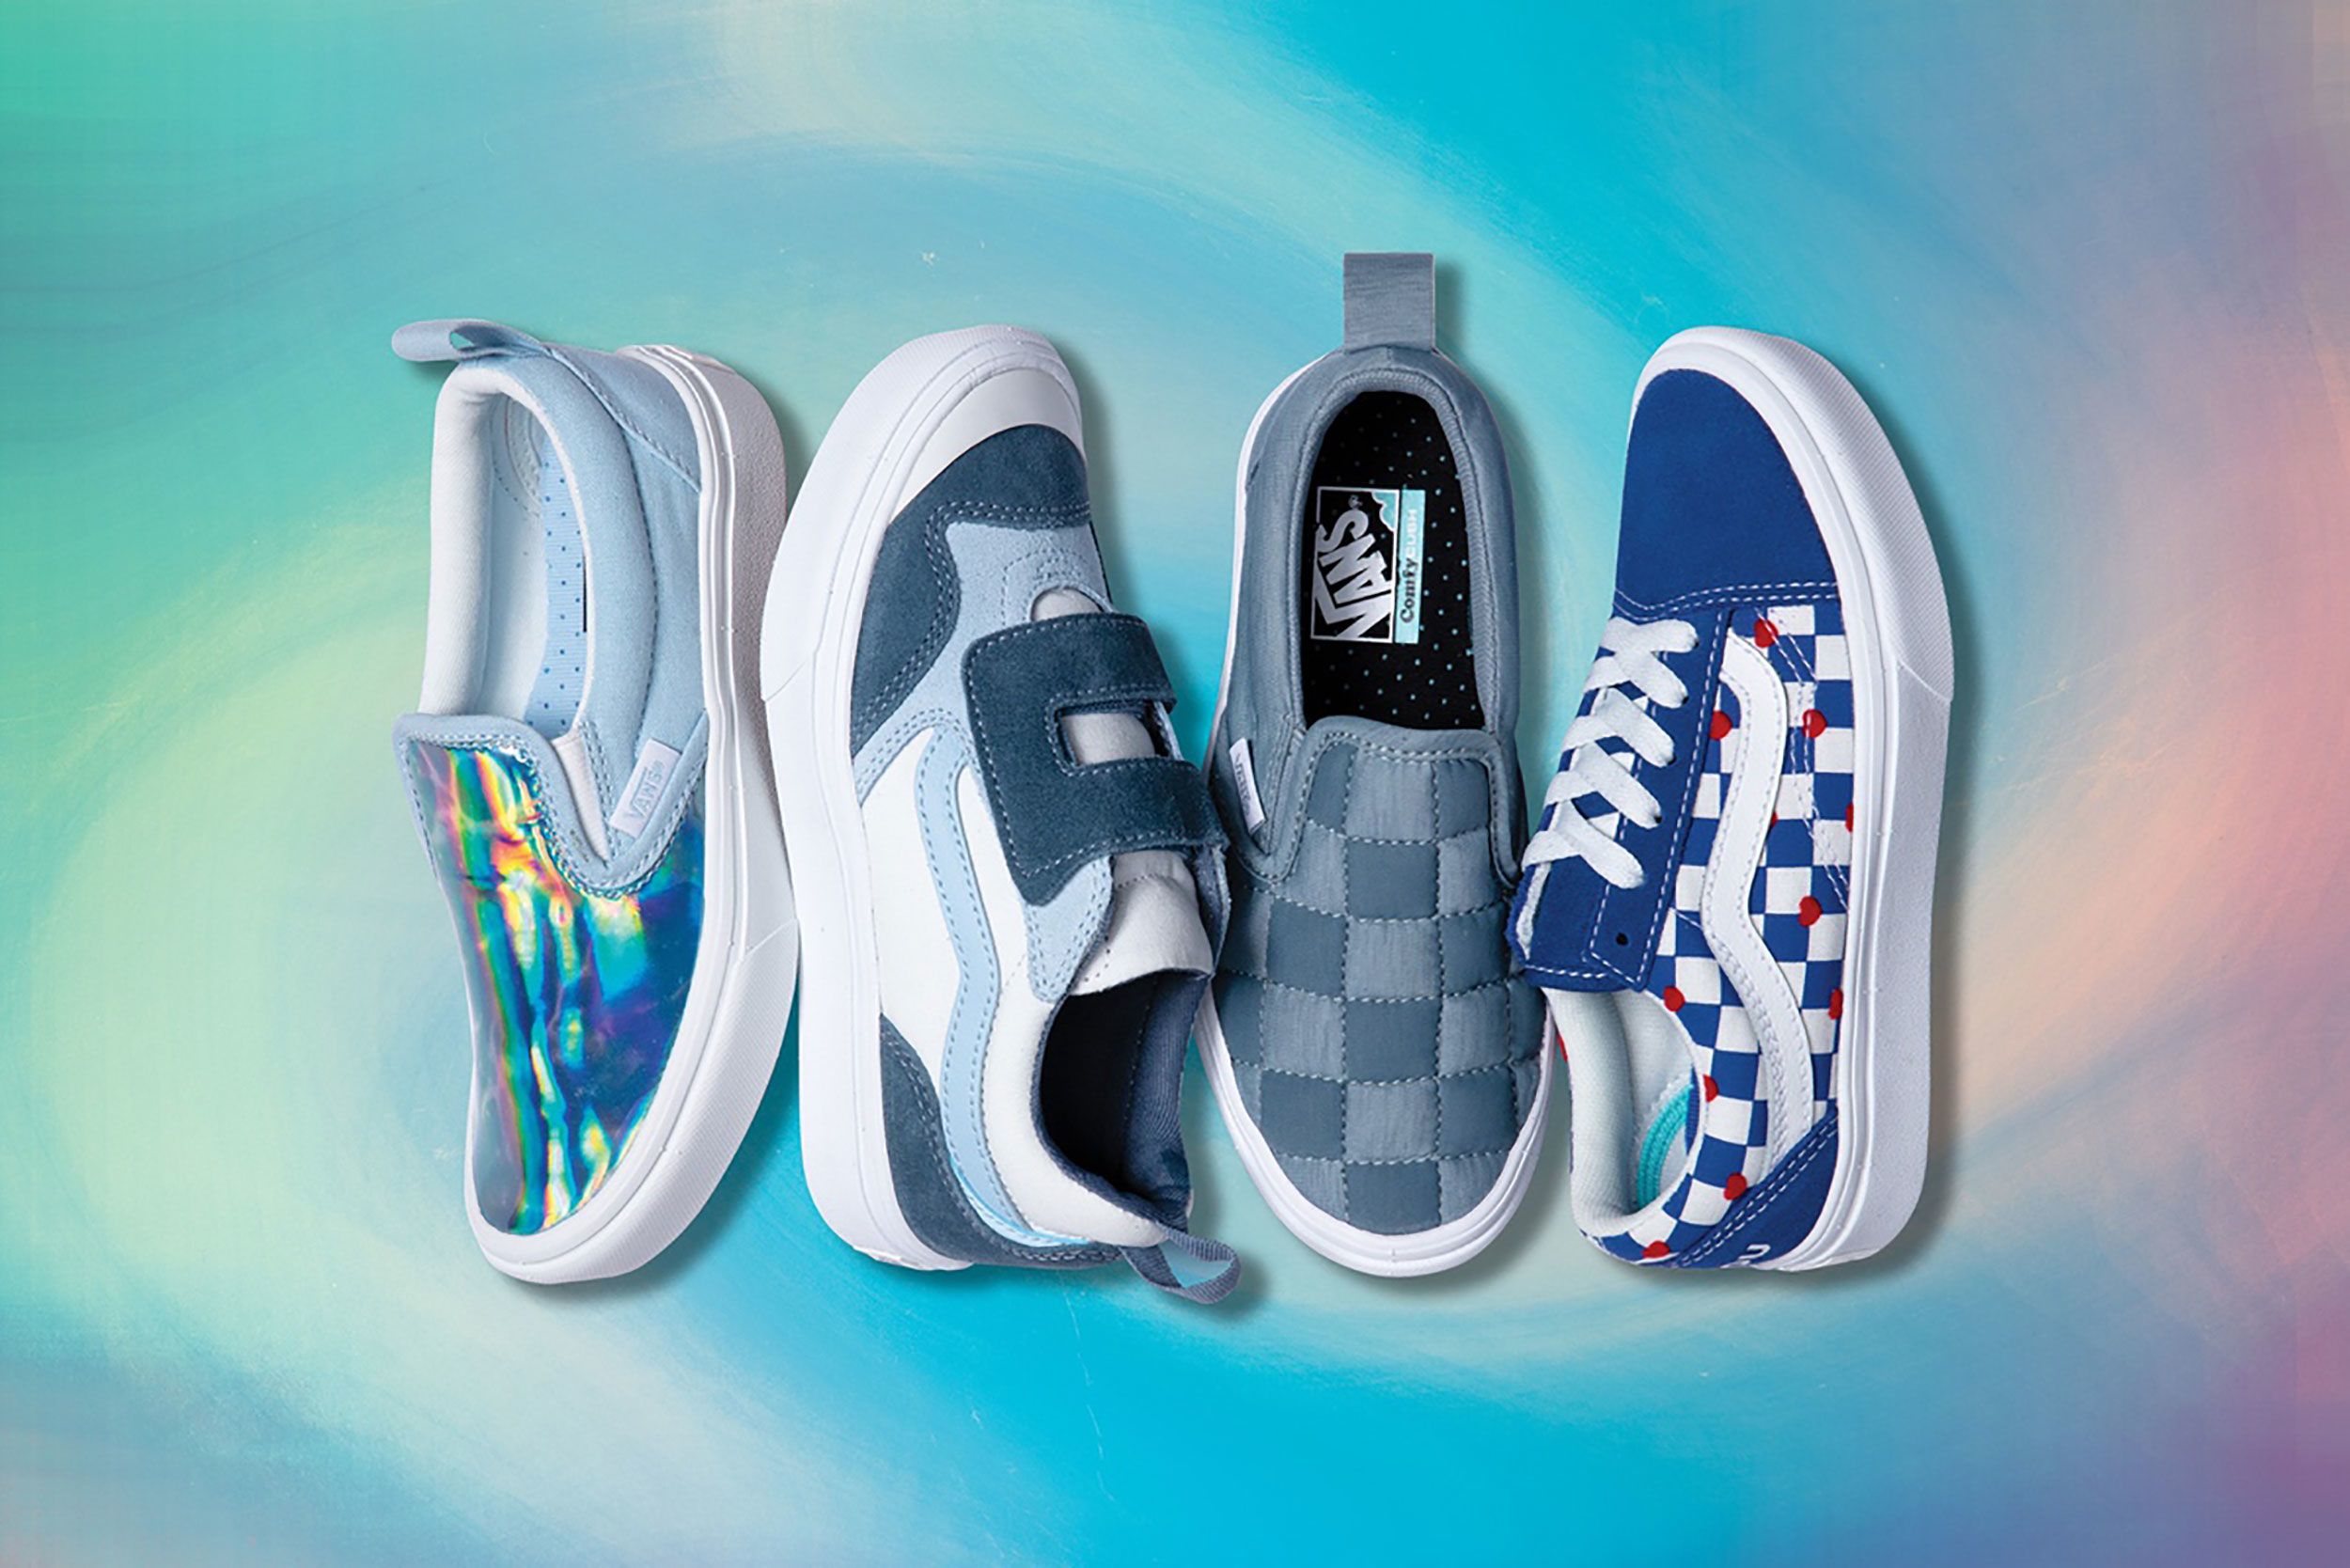 Vans Releases New Autism Awareness Collection Designed With  Sensory-Inclusive Elements | Cnn